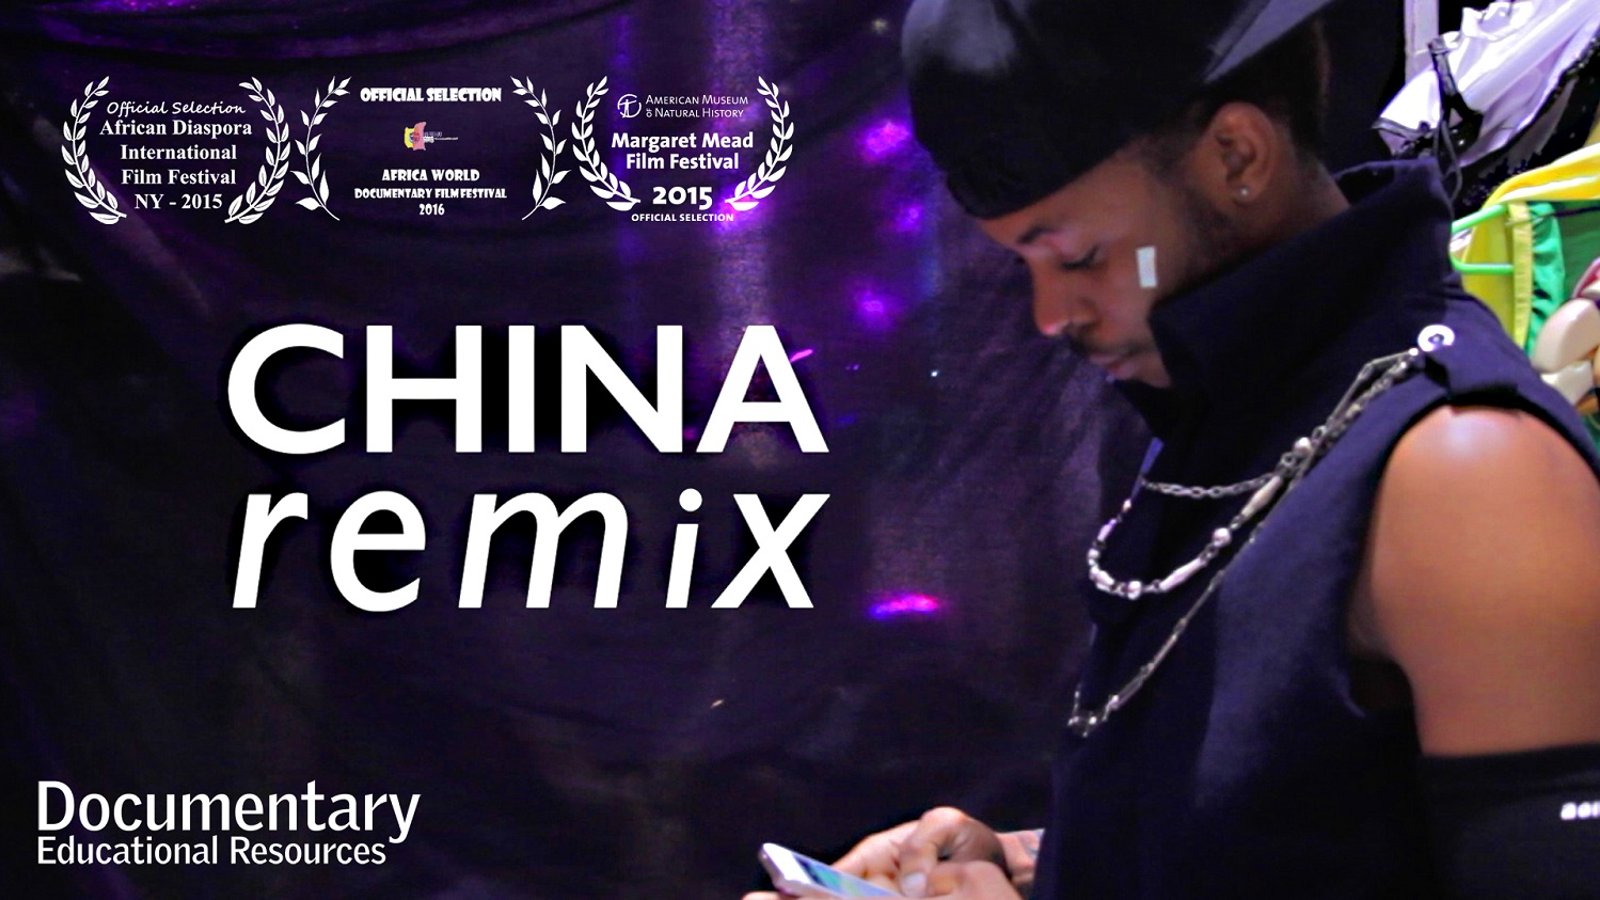 China Remix - African Hip-Hop Artists in China